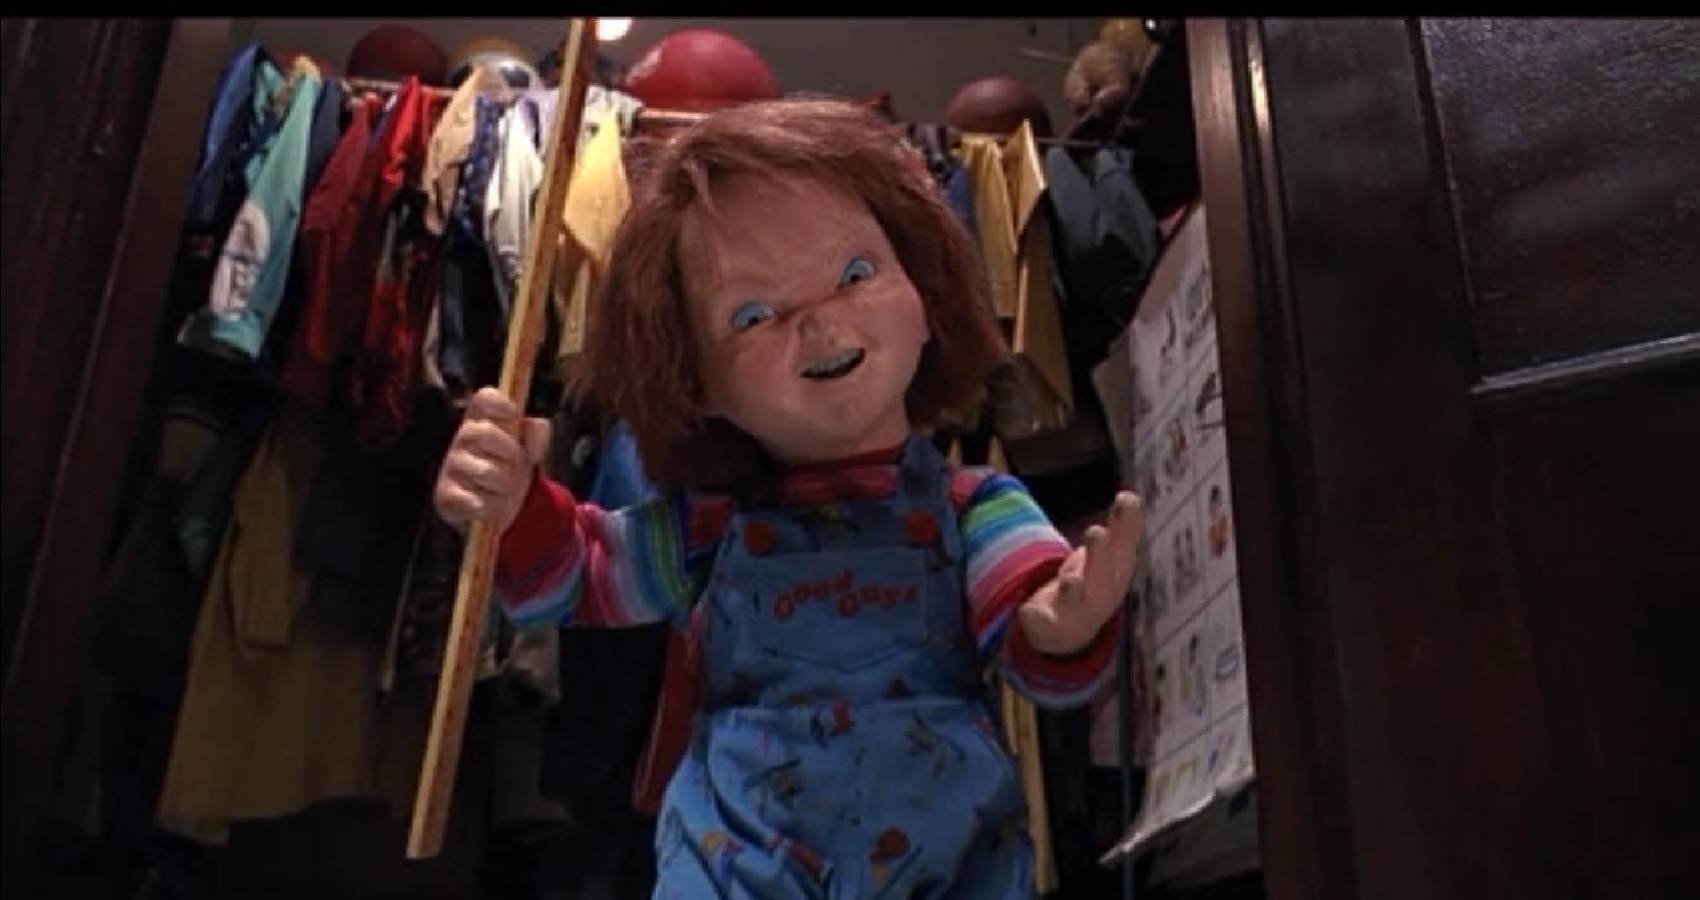 How “Child's Play” Became The Funniest, Most Reliably Surprising